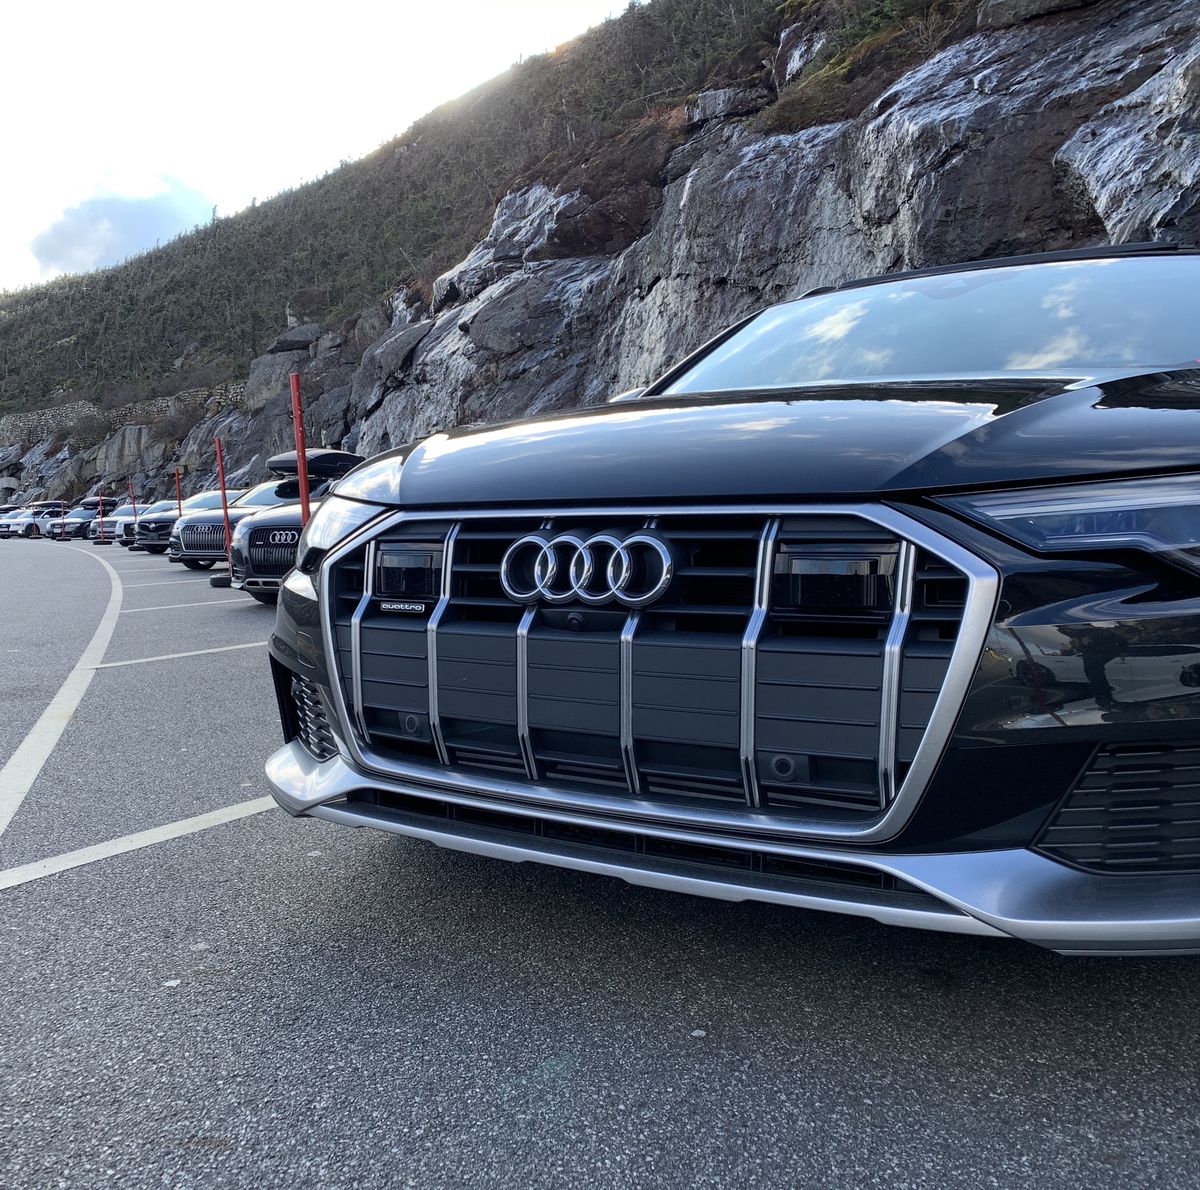 Audi A6 Allroad Lives Up to the Cult Following